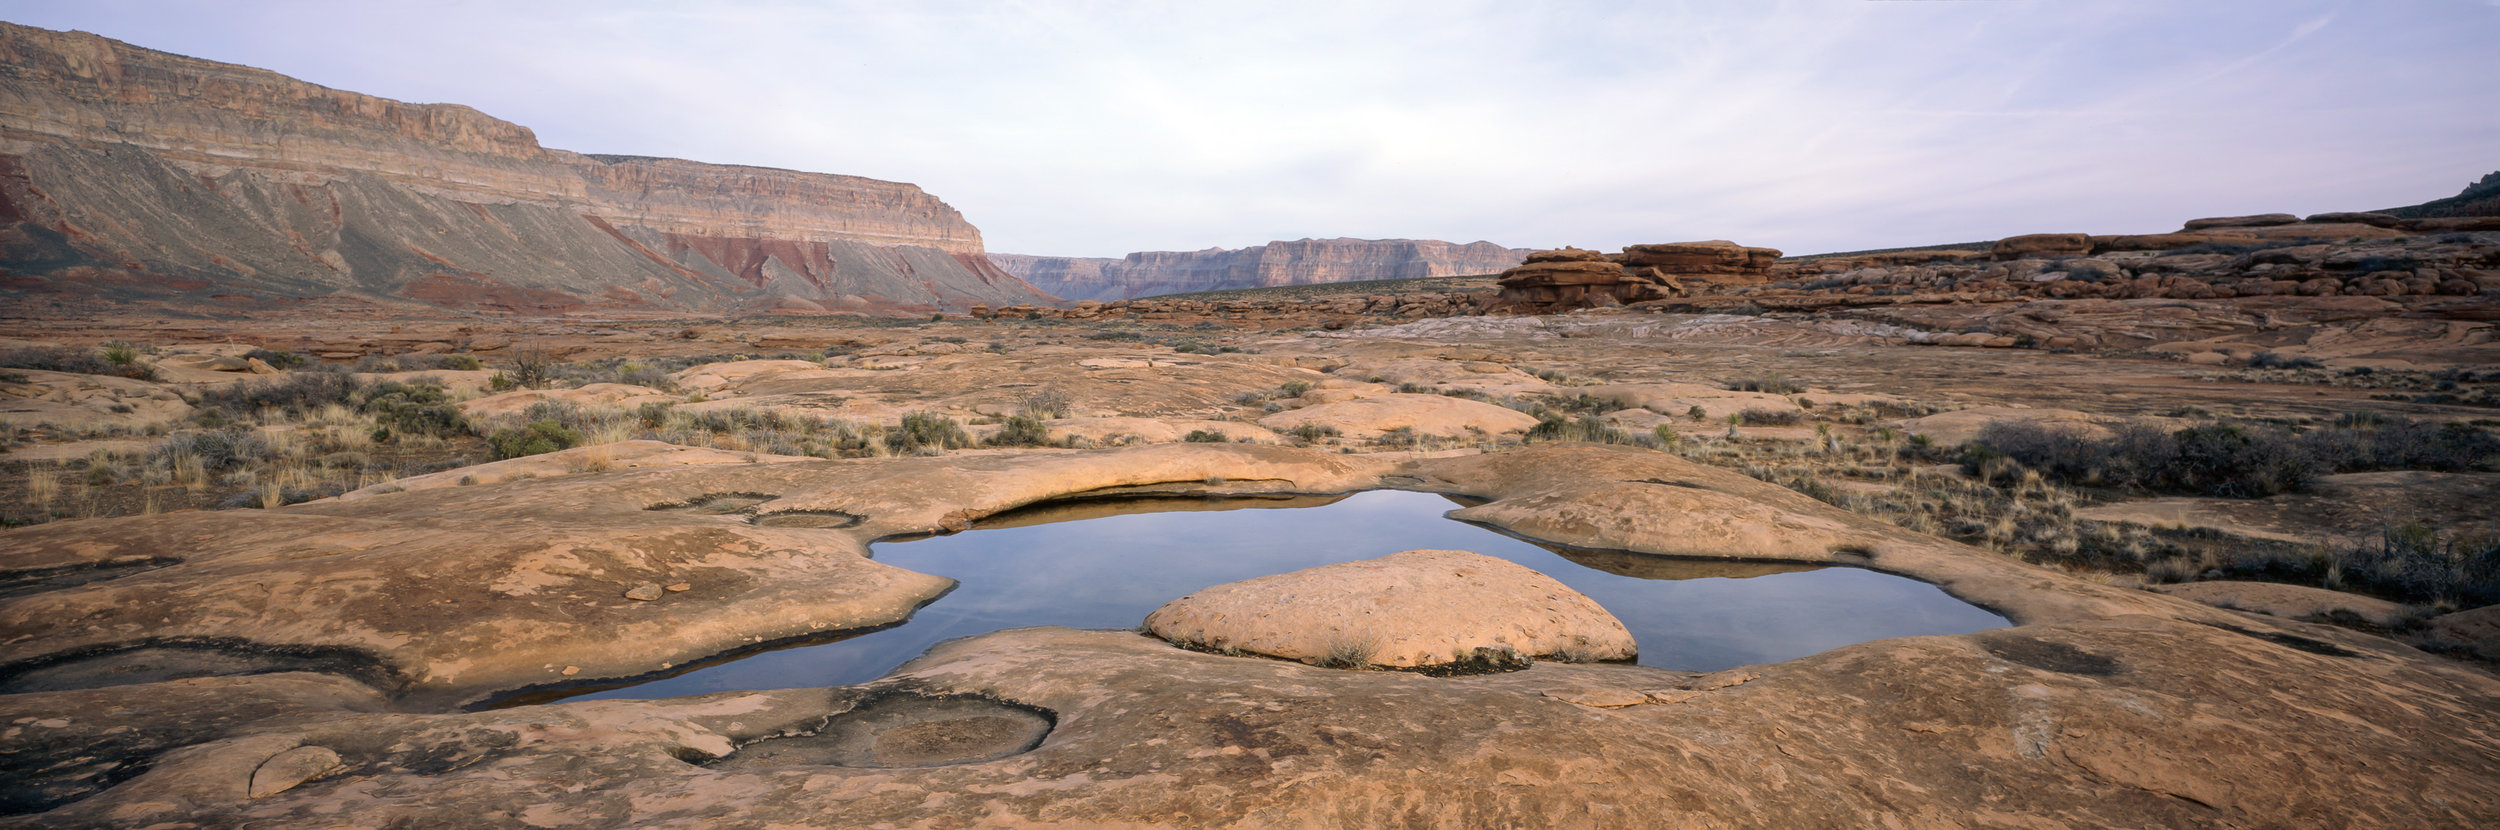  Reflections in a pot hole after sunrise, looking north up Kanab Creek. Provia 100, 1/15, f/20. 